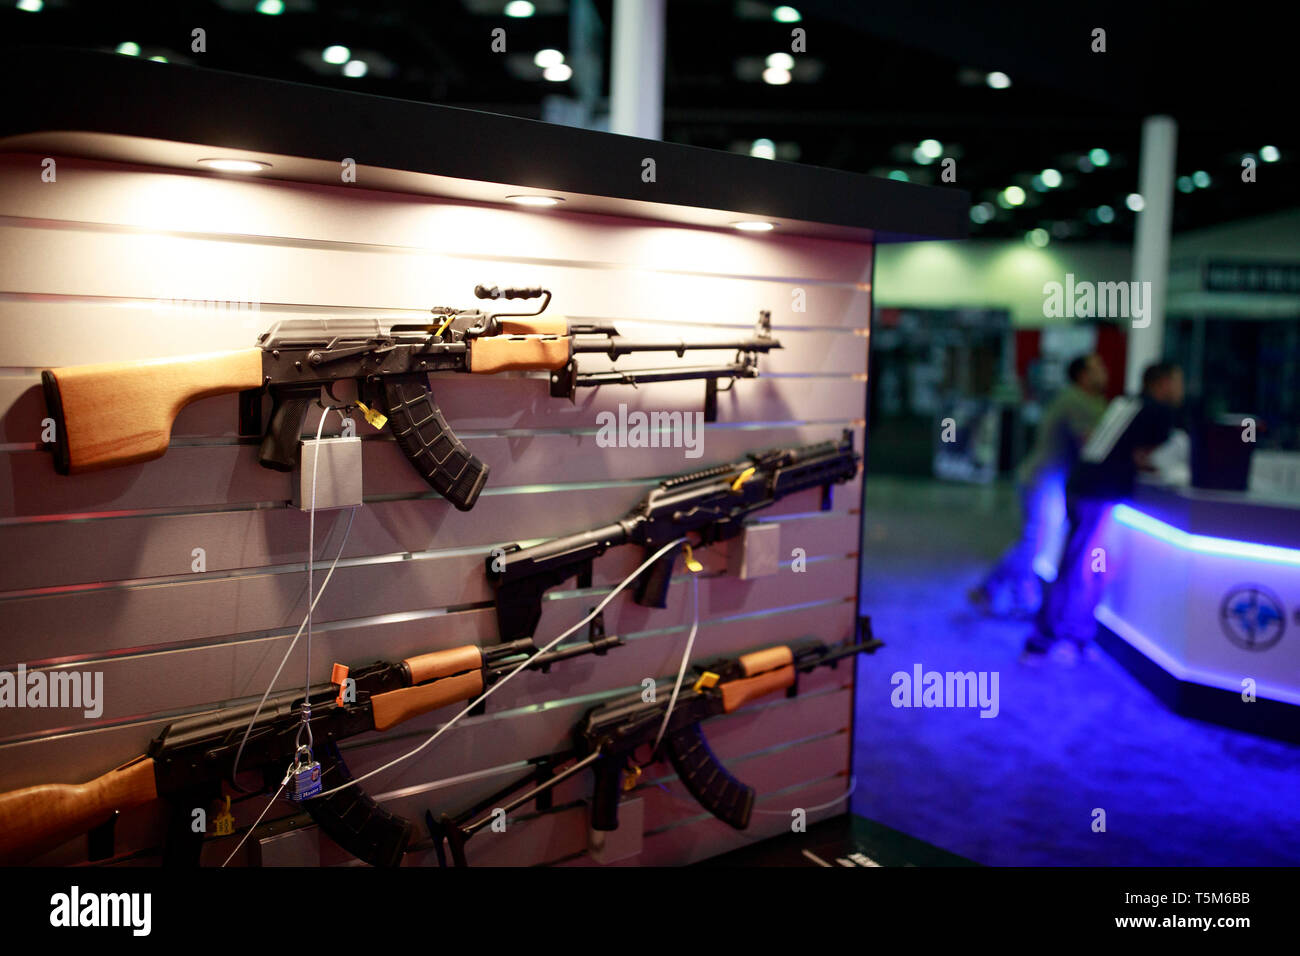 Eastern Bloc style AK platform rifles are on display at the Century Arms booth. Vendors prepare booths in the exhibition hall before the National Rifle Association (NRA) convention at the Indiana Convention Center in downtown Indianapolis. Stock Photo